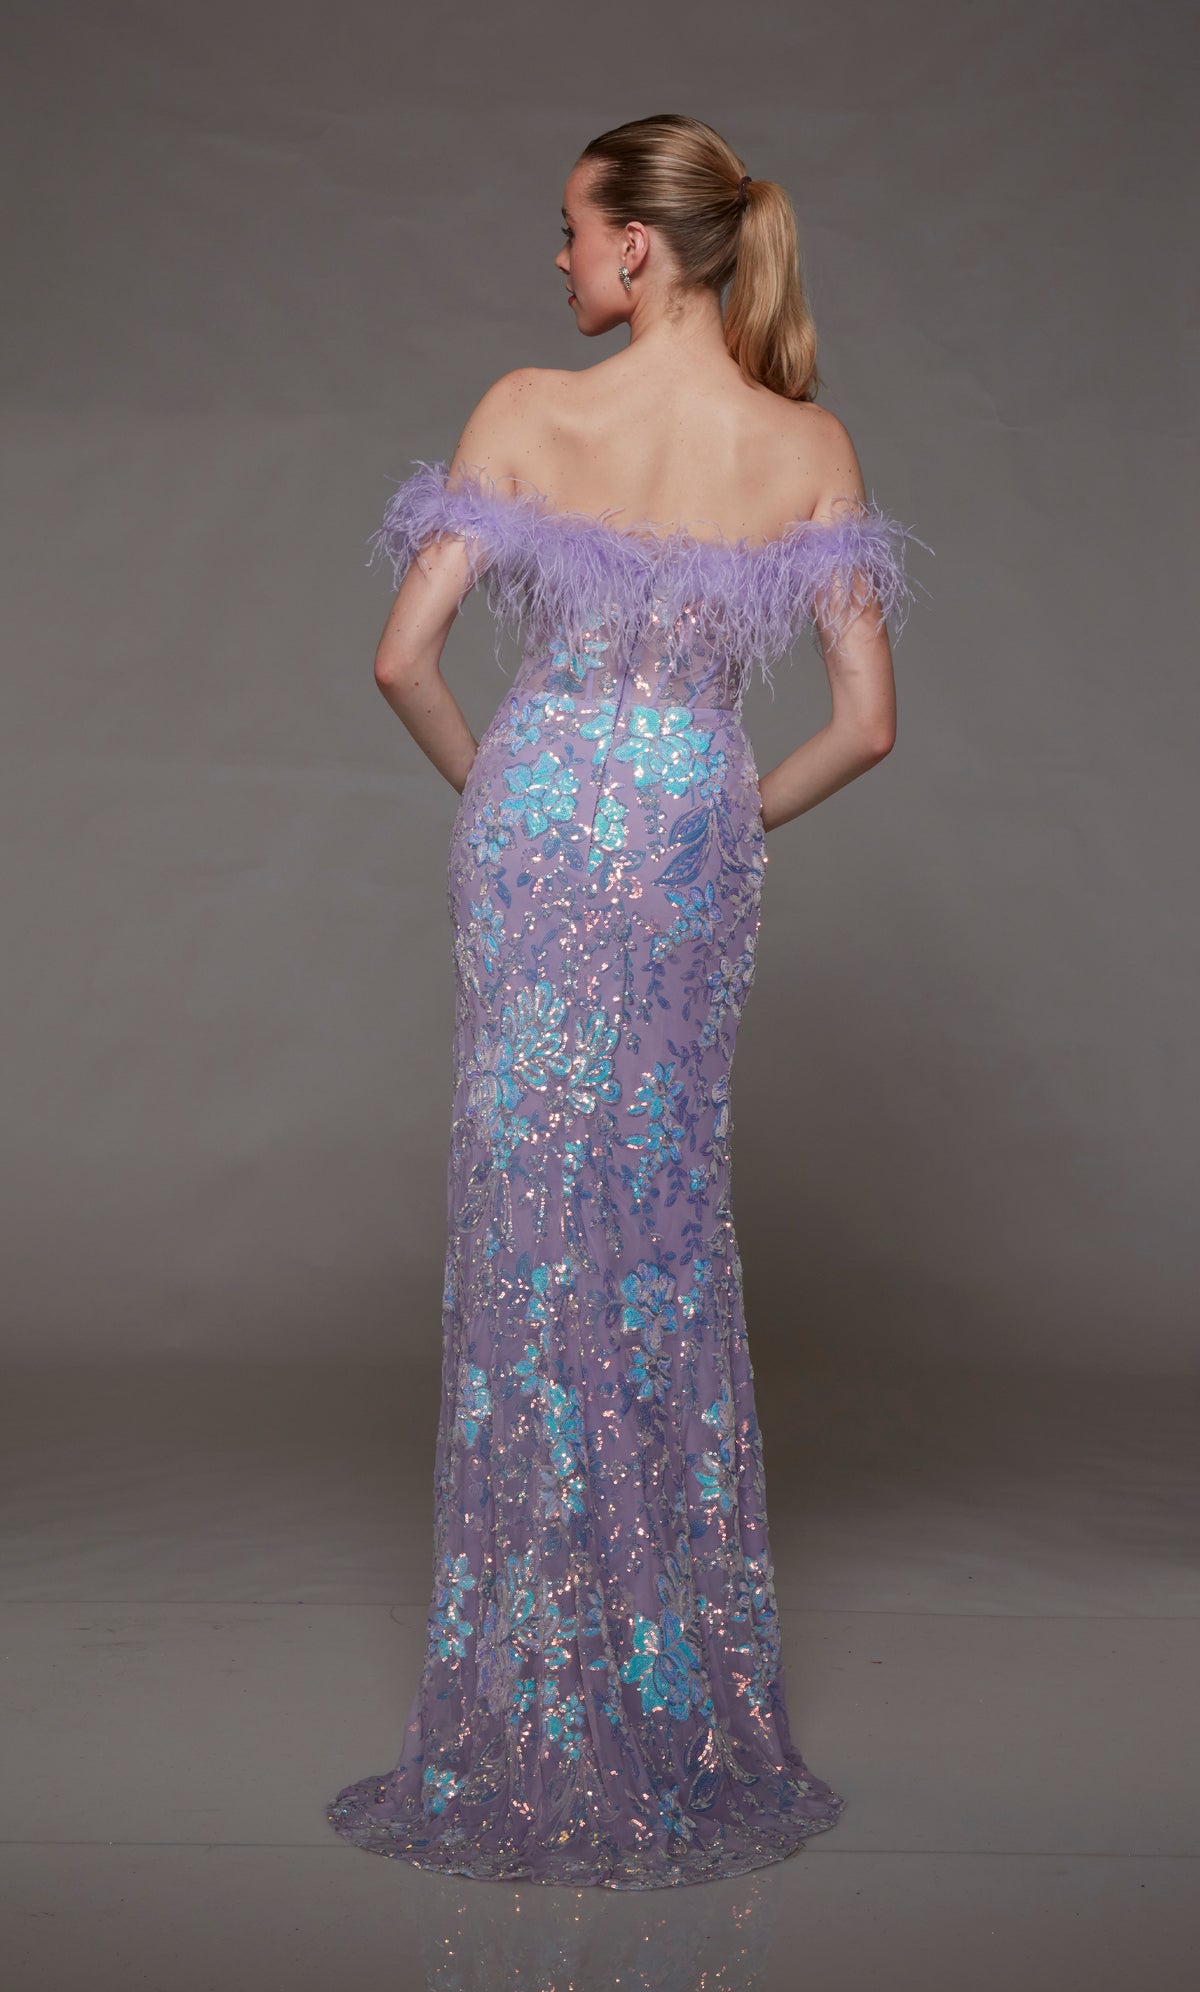 Lilac purple prom dress with feather-trimmed off-the-shoulder neckline, iridescent sequin flowers, side slit, and slight train for an elegant and stylish look.